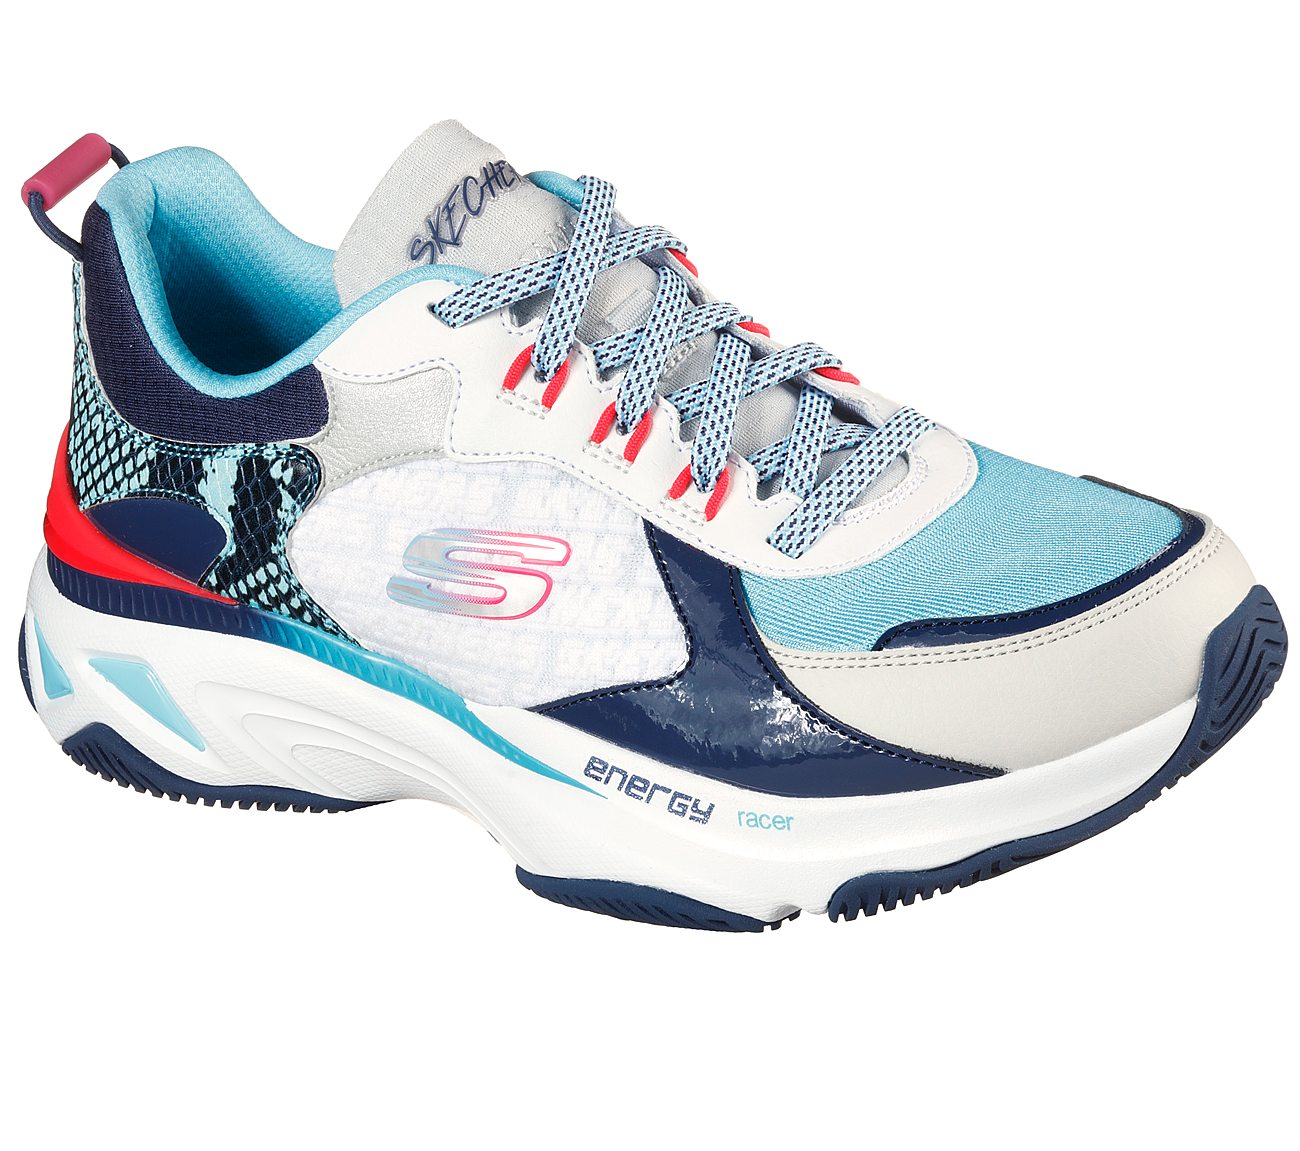 ENERGY RACER-OH SO COOL, WHITE/BLUE/PINK Footwear Lateral View